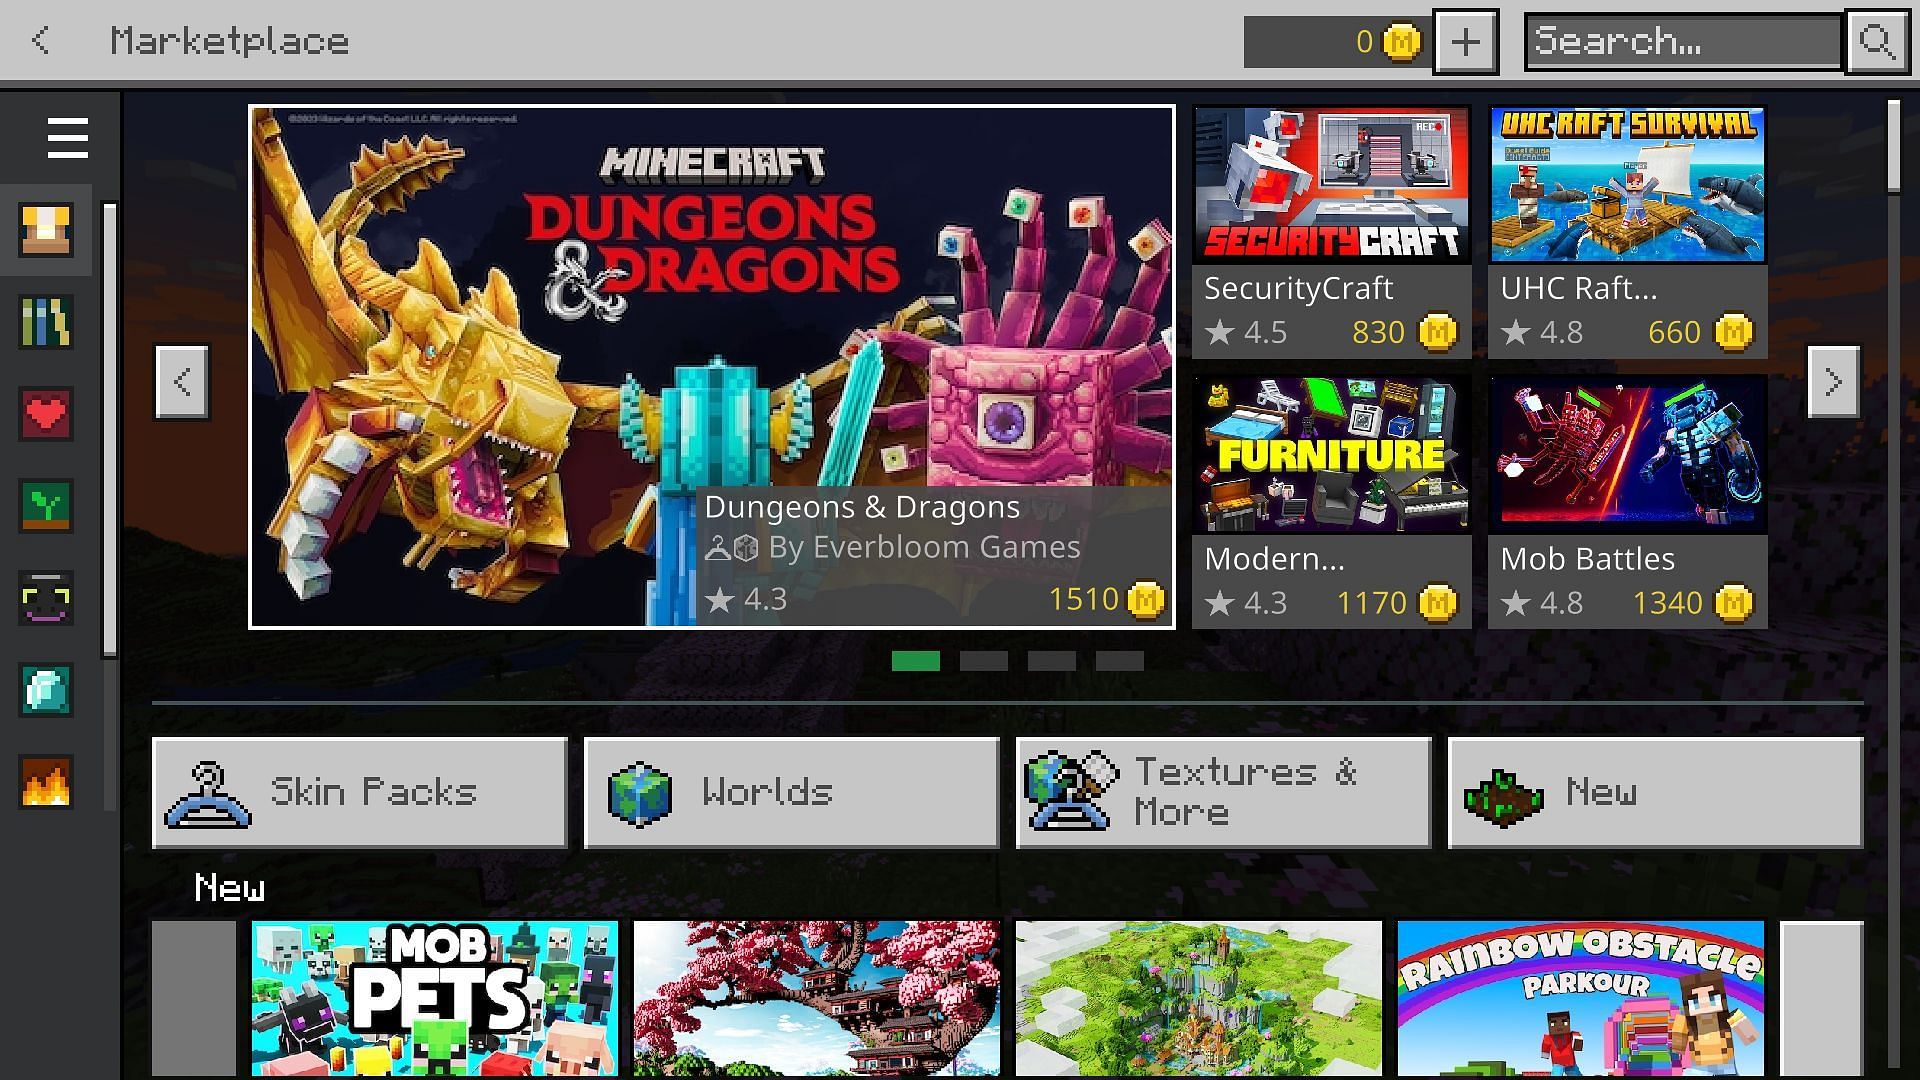 Minecraft Dungeons &amp; Dragons DLC will be available on the marketplace (Image via Mojang)